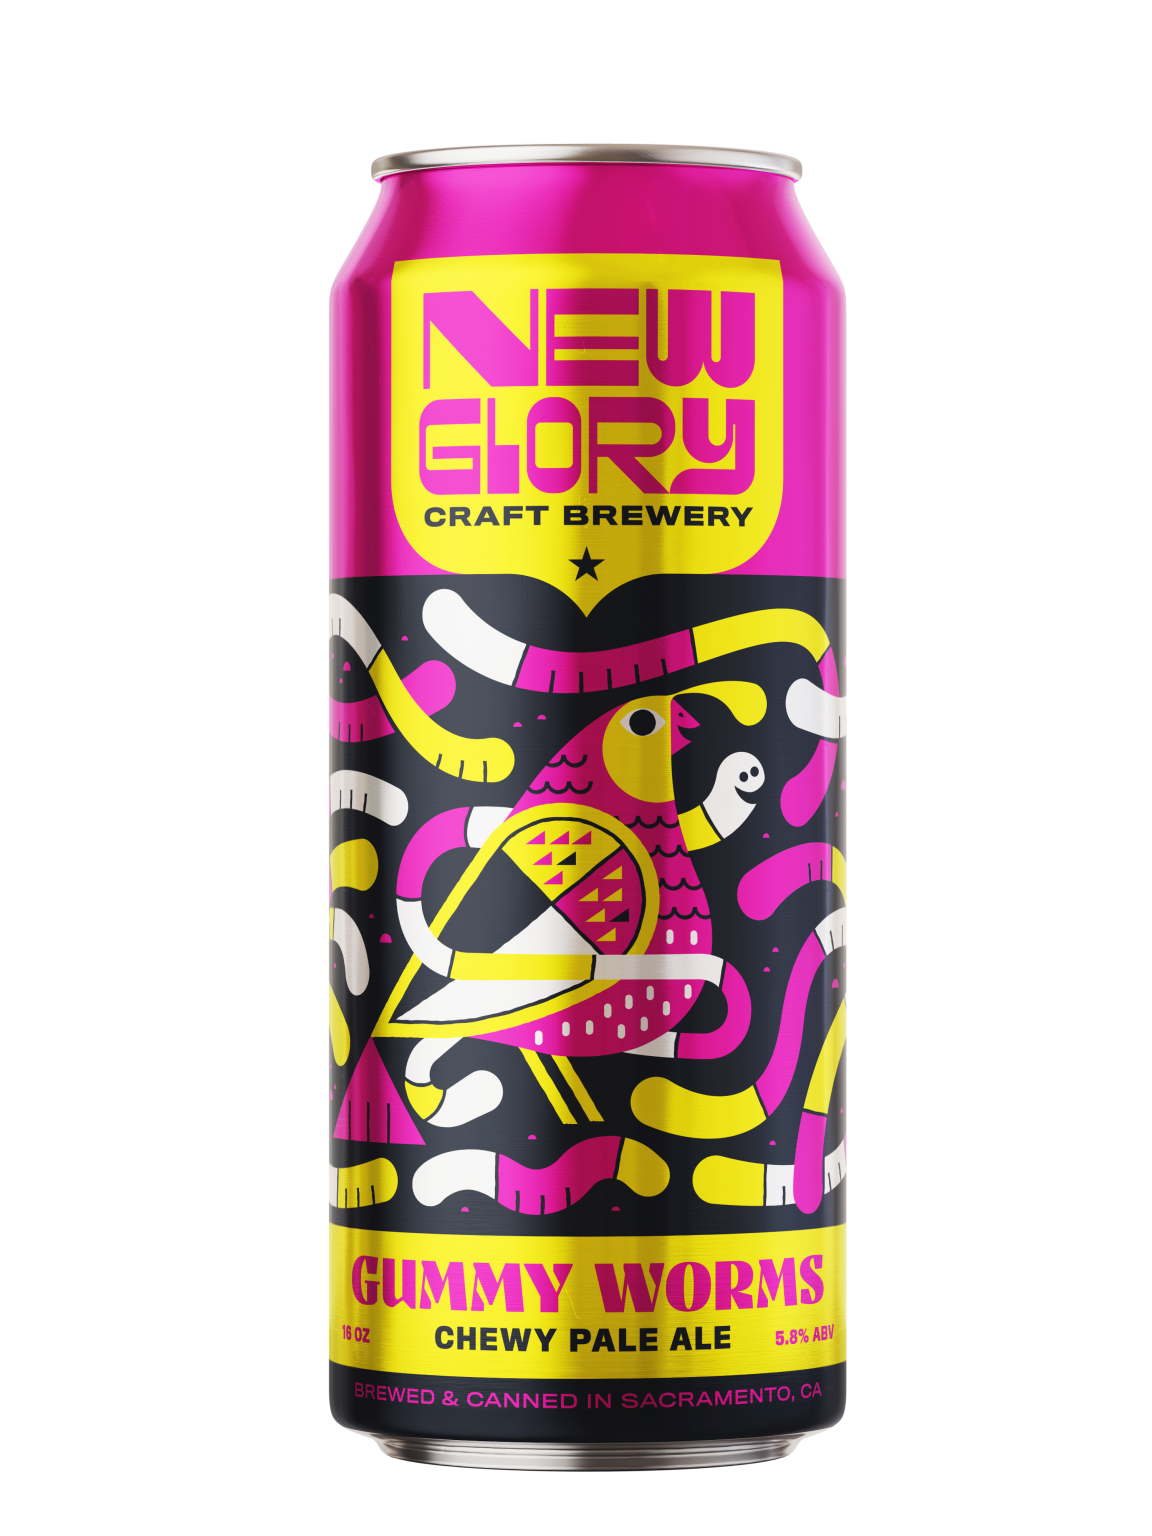 Buy New Glory Gummy Worms Chewy Pale Ale Online -Craft City